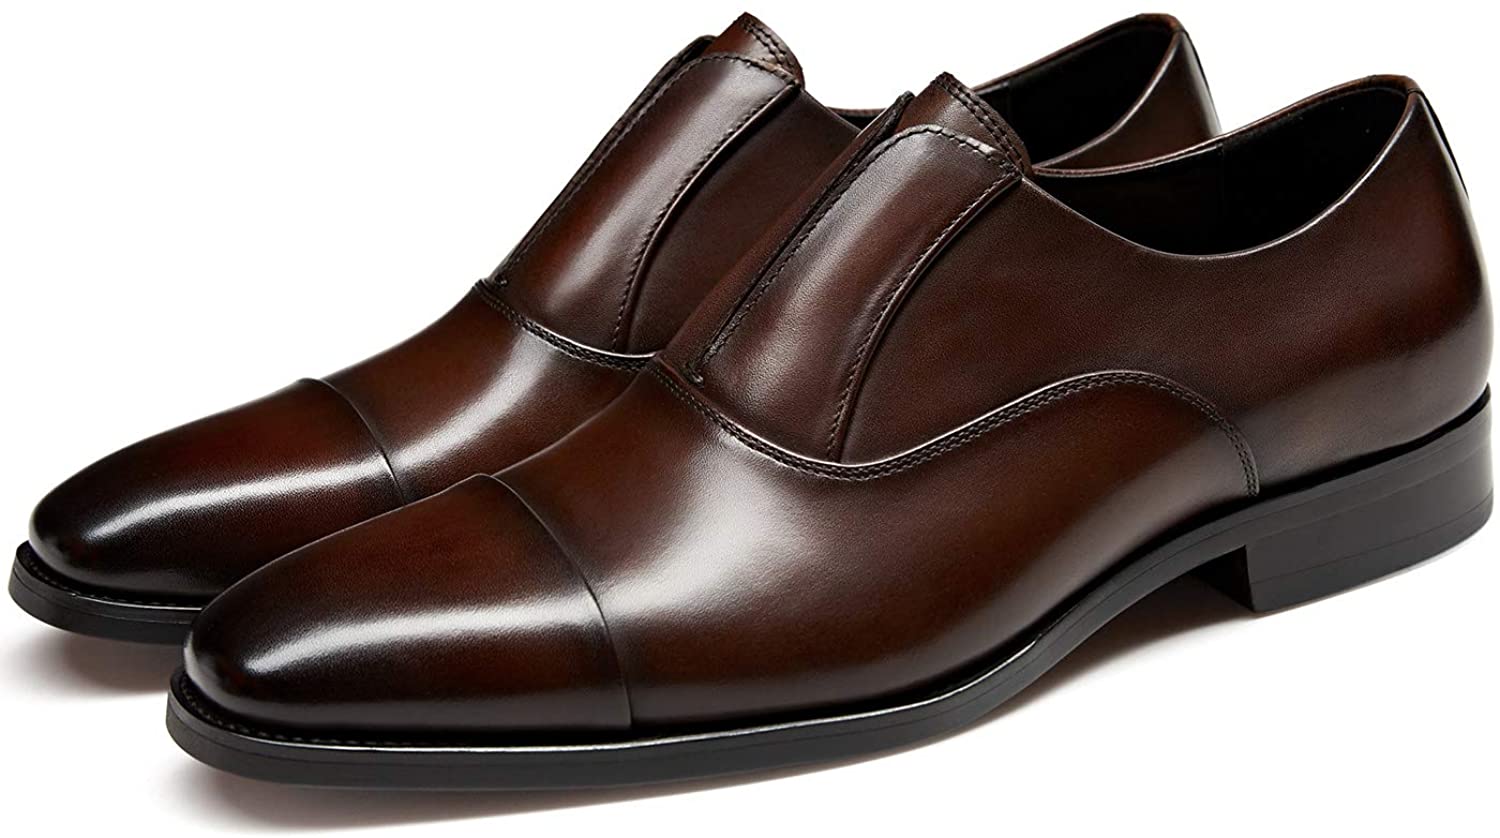 GIFENNSE Men's Dress Shoes Leather Business Easy Wear Oxford Formal Men Shoes